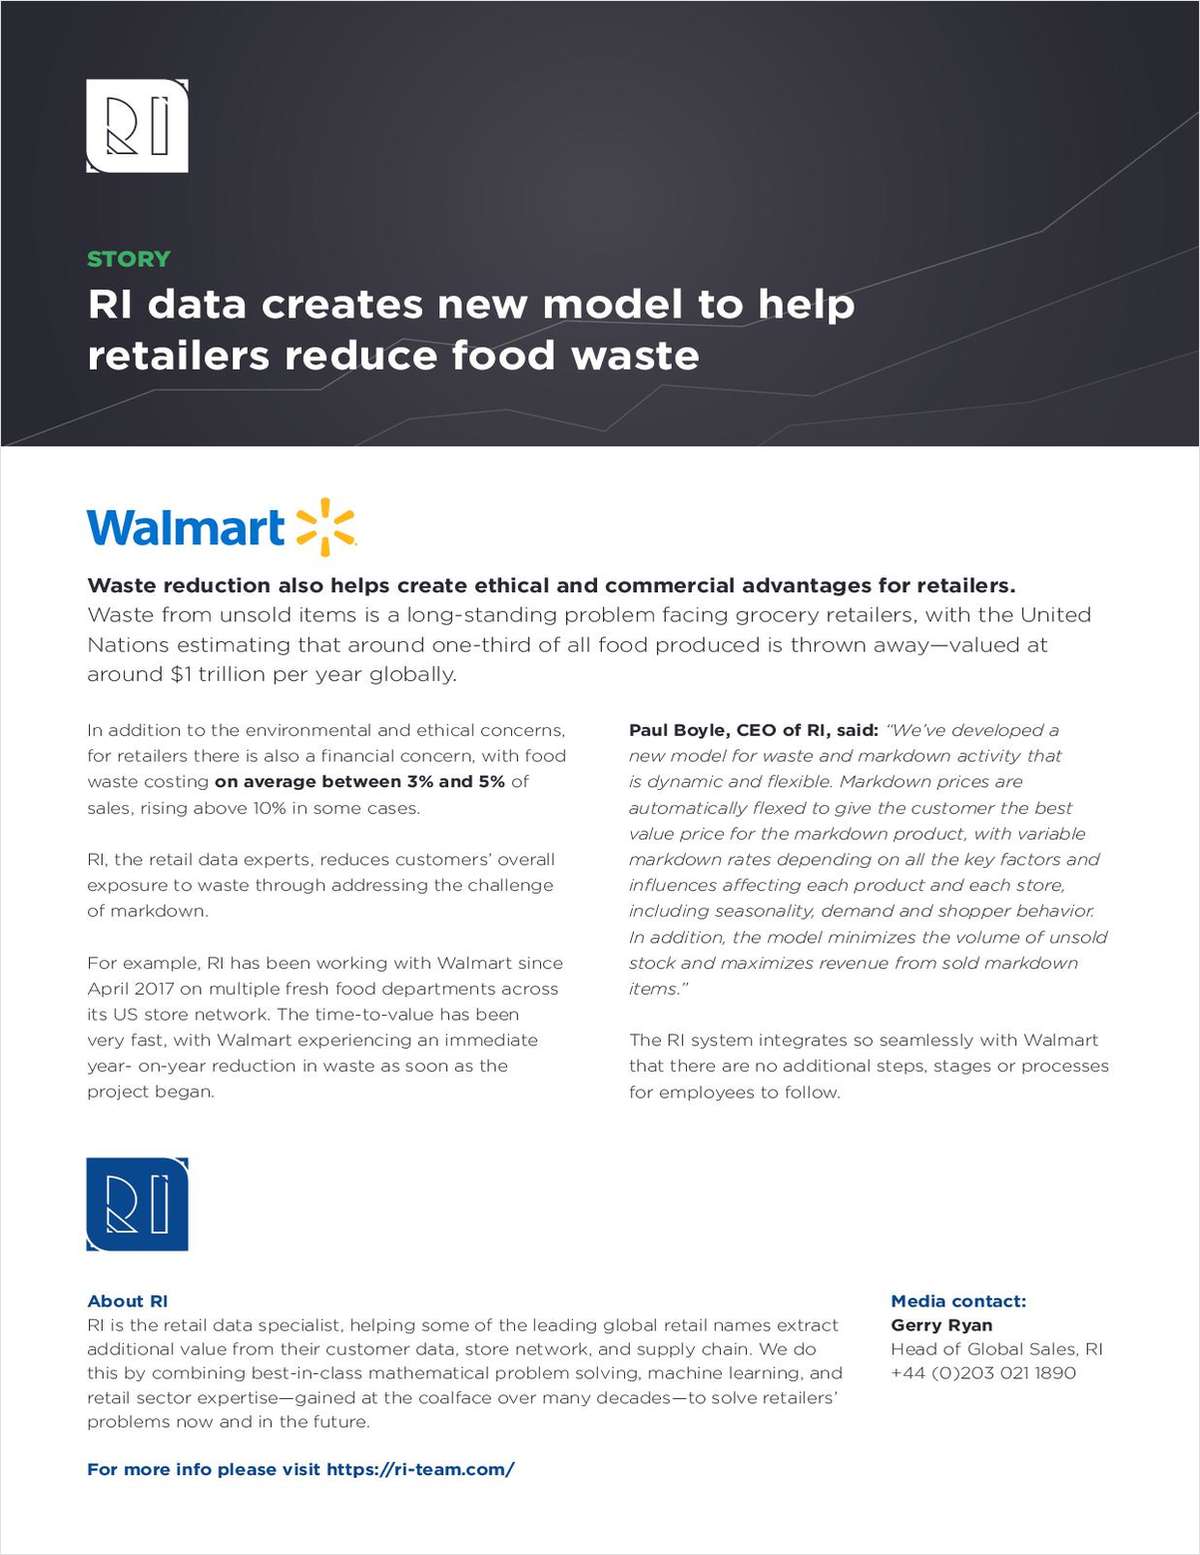 Food waste reduction through optimized markdowns